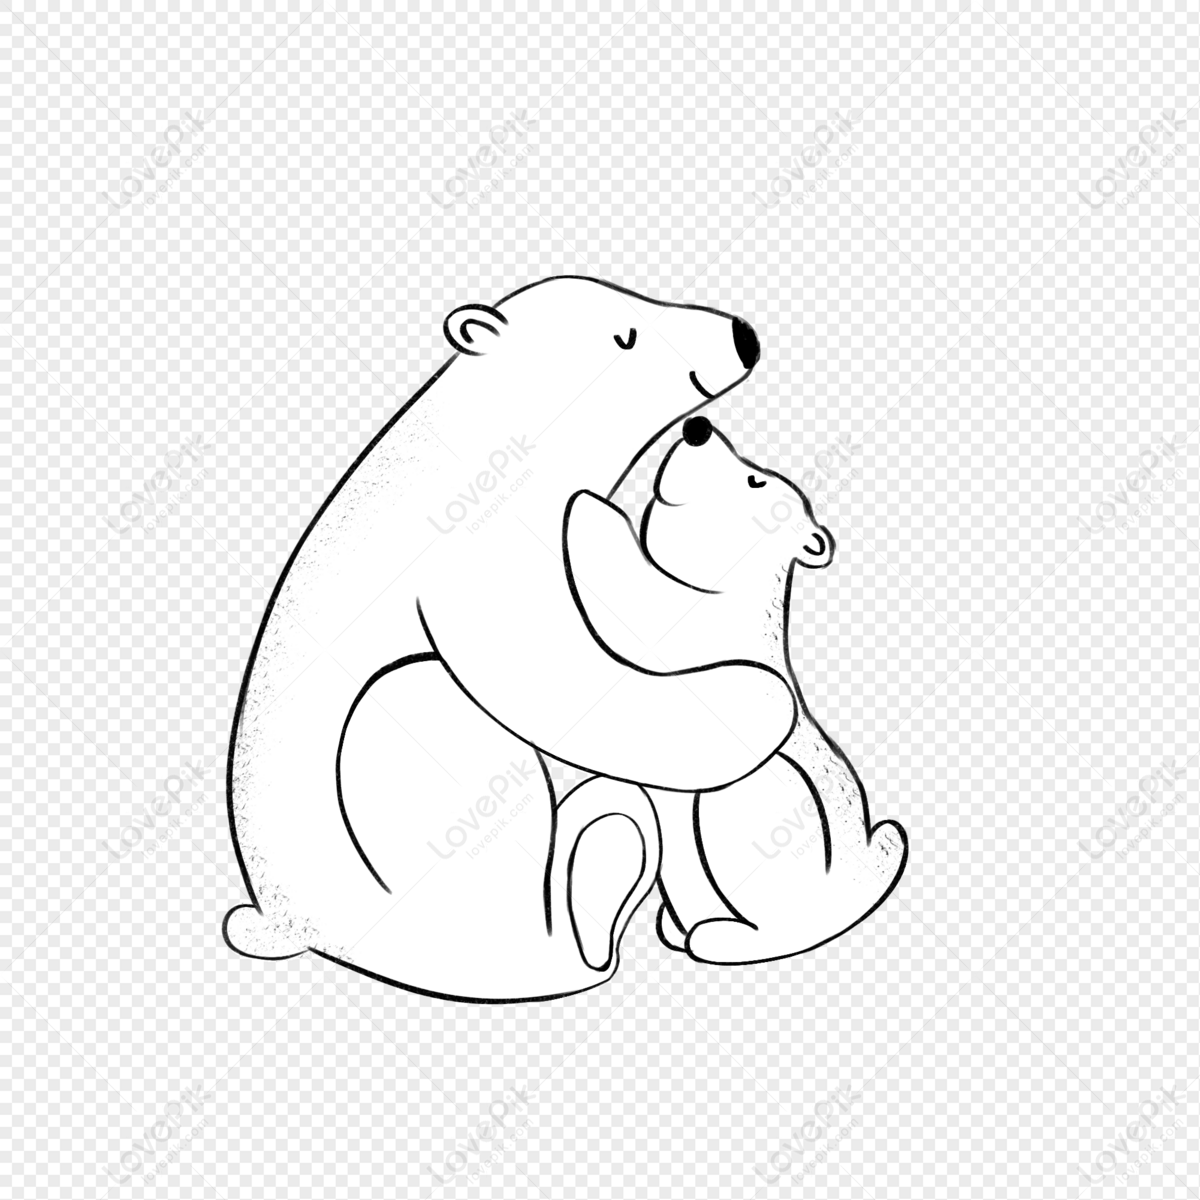 Polar Bear Cartoon Image PNG Hd Transparent Image And Clipart Image For  Free Download - Lovepik | 401284614